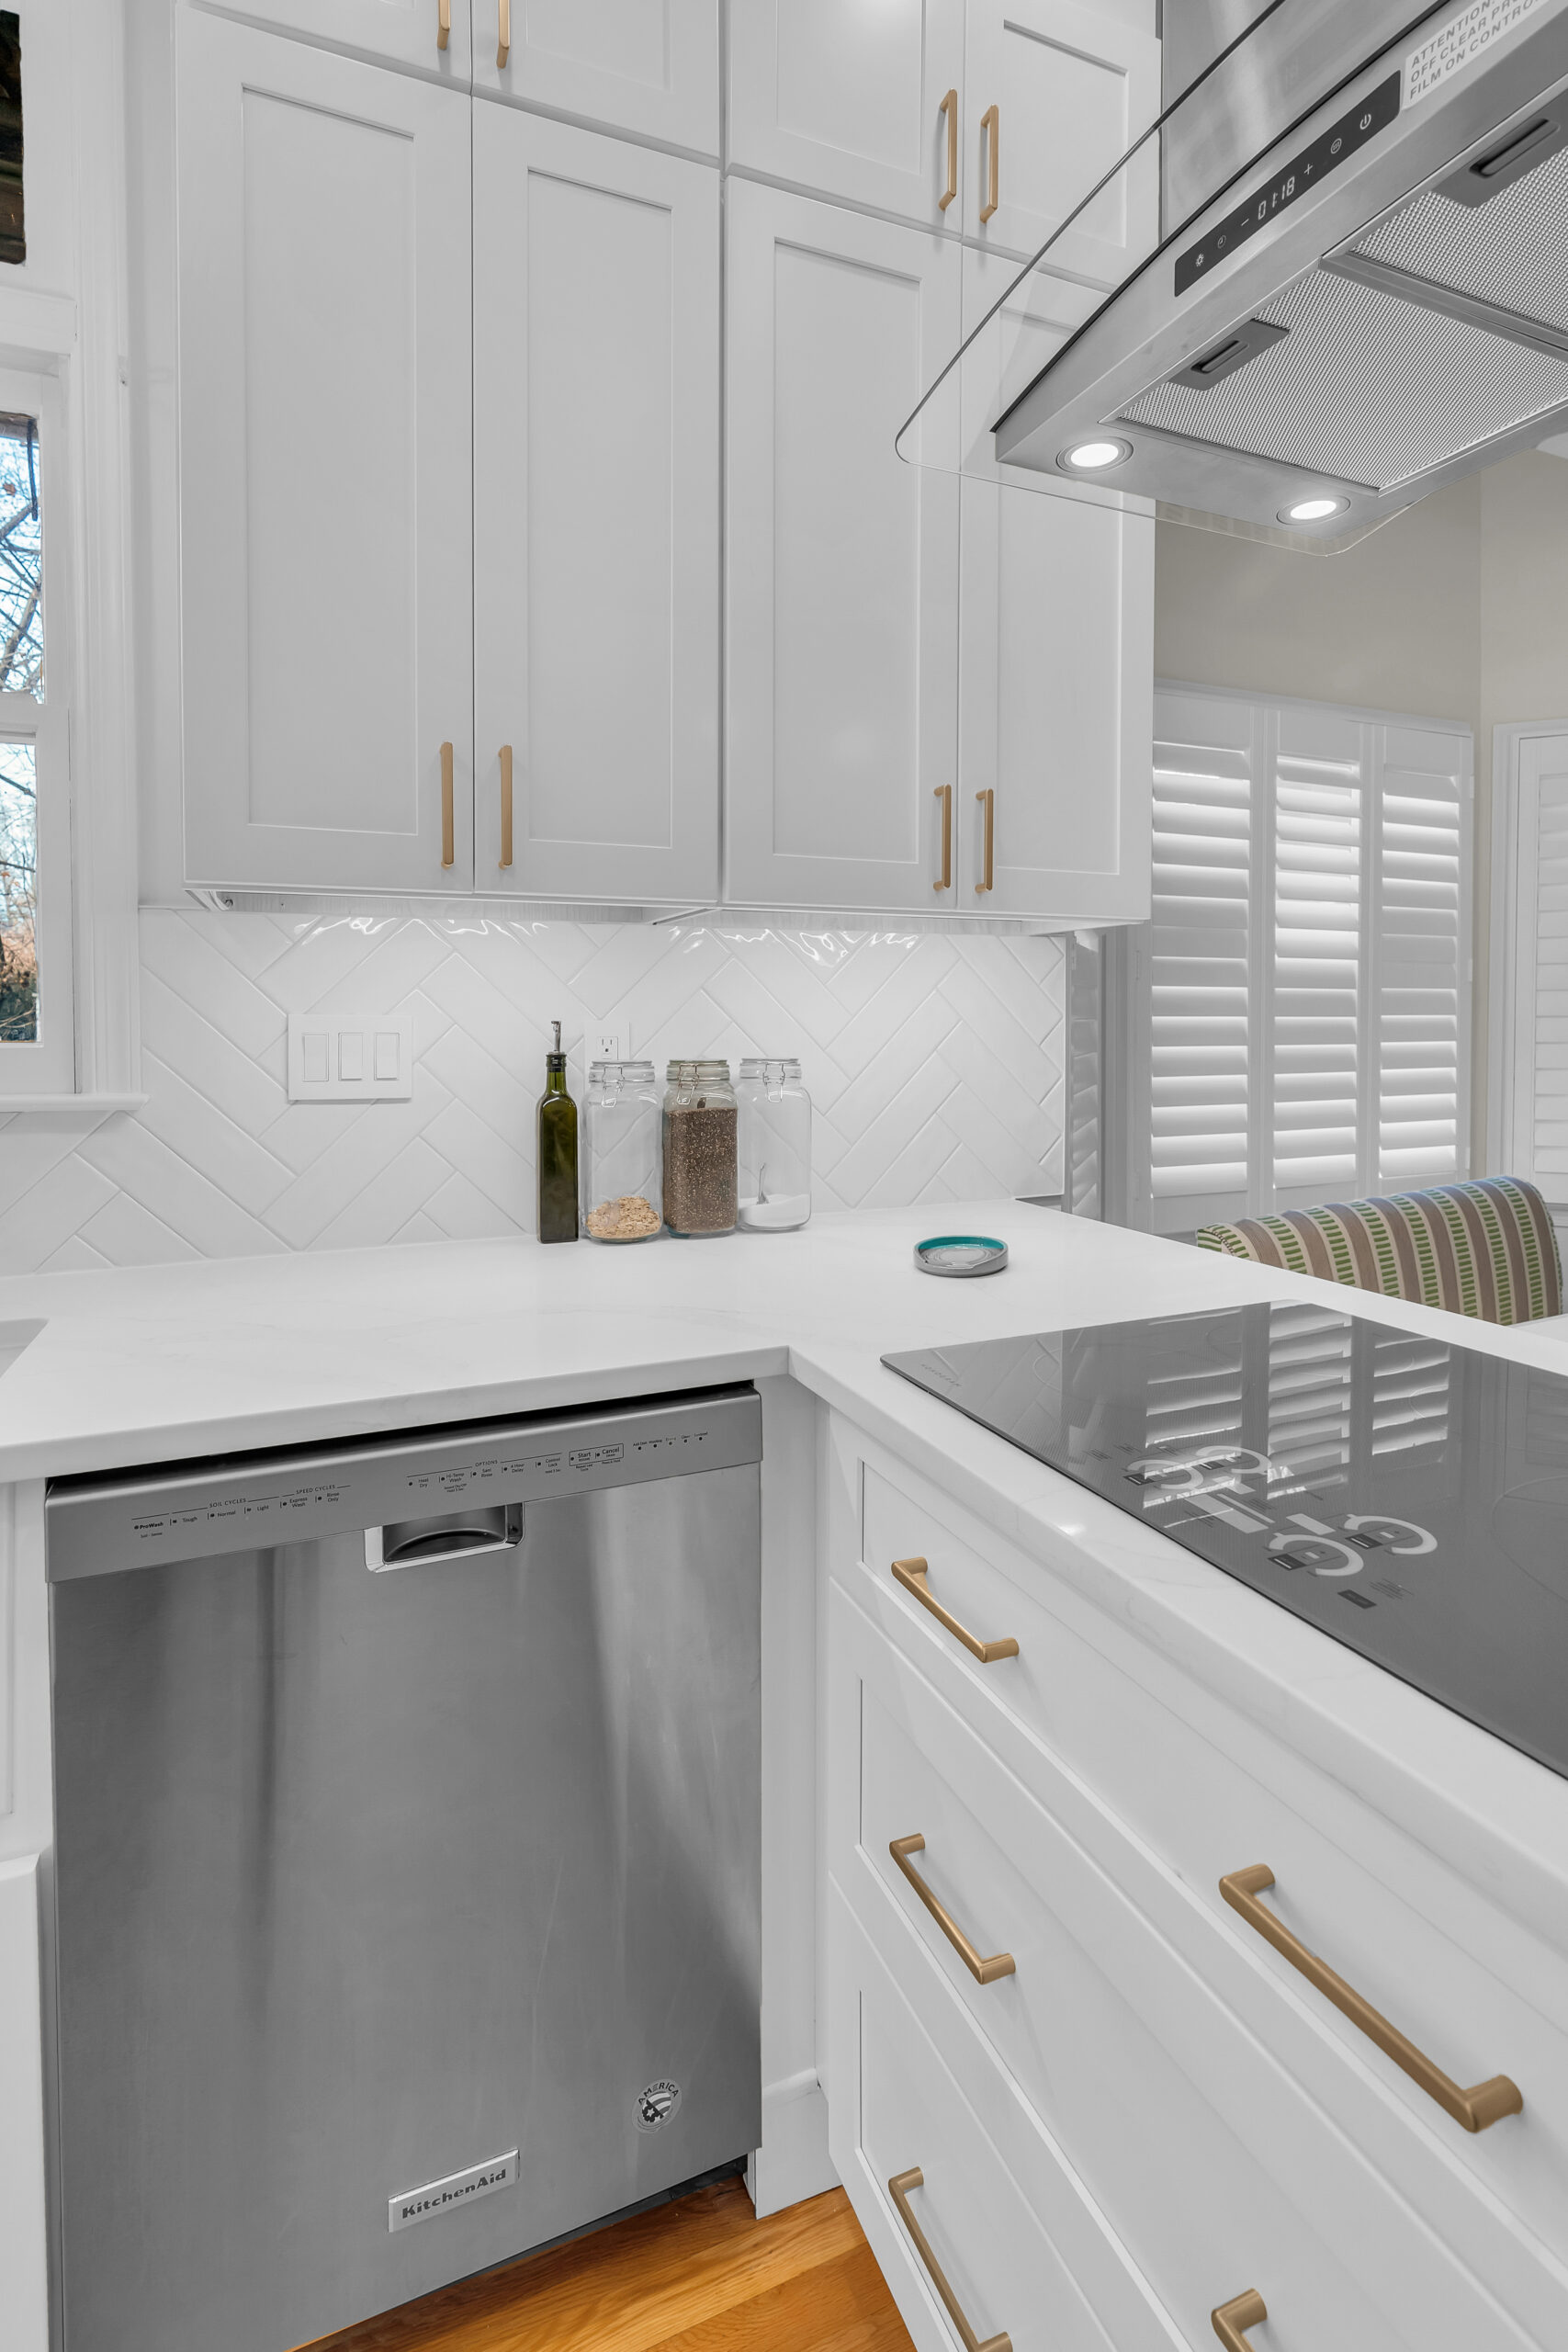 White kitchen design with shaker cabinets